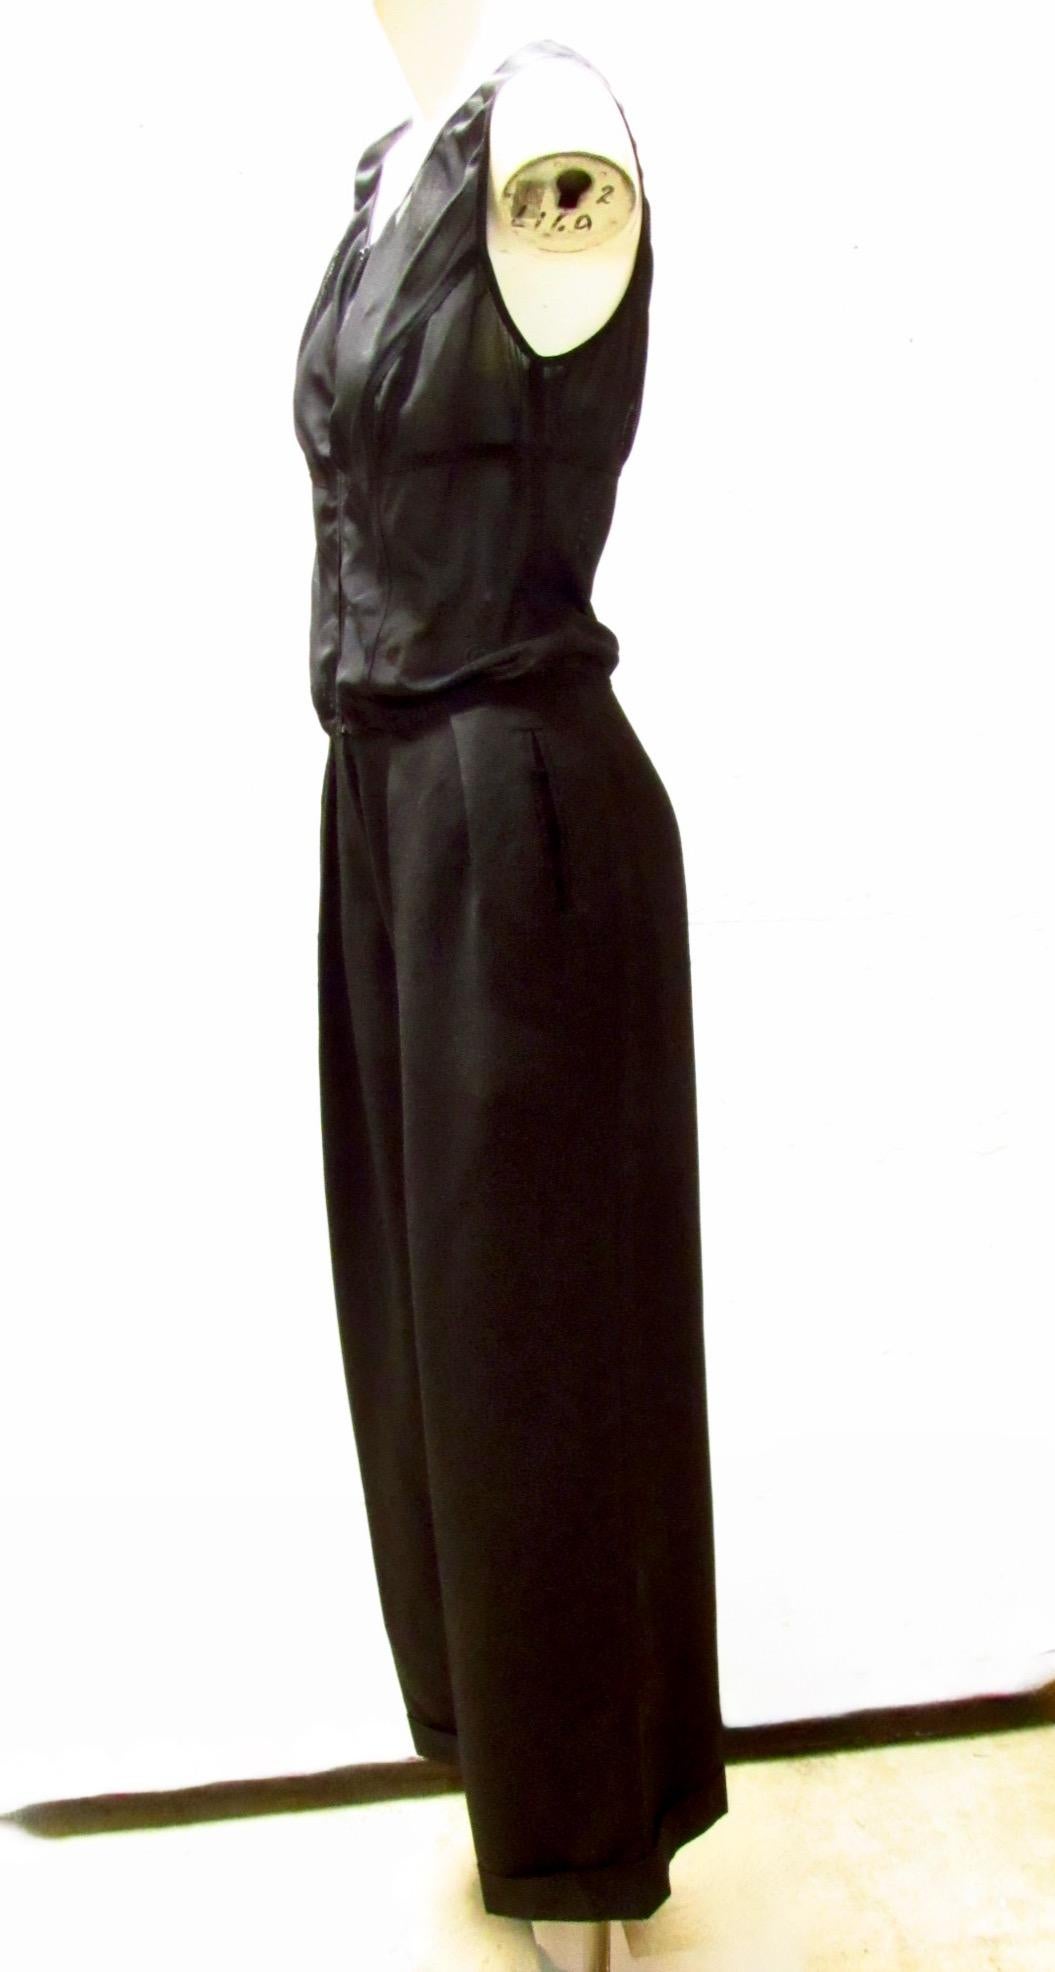 Black, front zippered jumpsuit from vintage Chantal Thomass. The pants are a wool acetate, featuring pockets on the seams and cuffed hems. The zippered bodice is a mesh nylon spandex blend with seams crossing the front and back. 